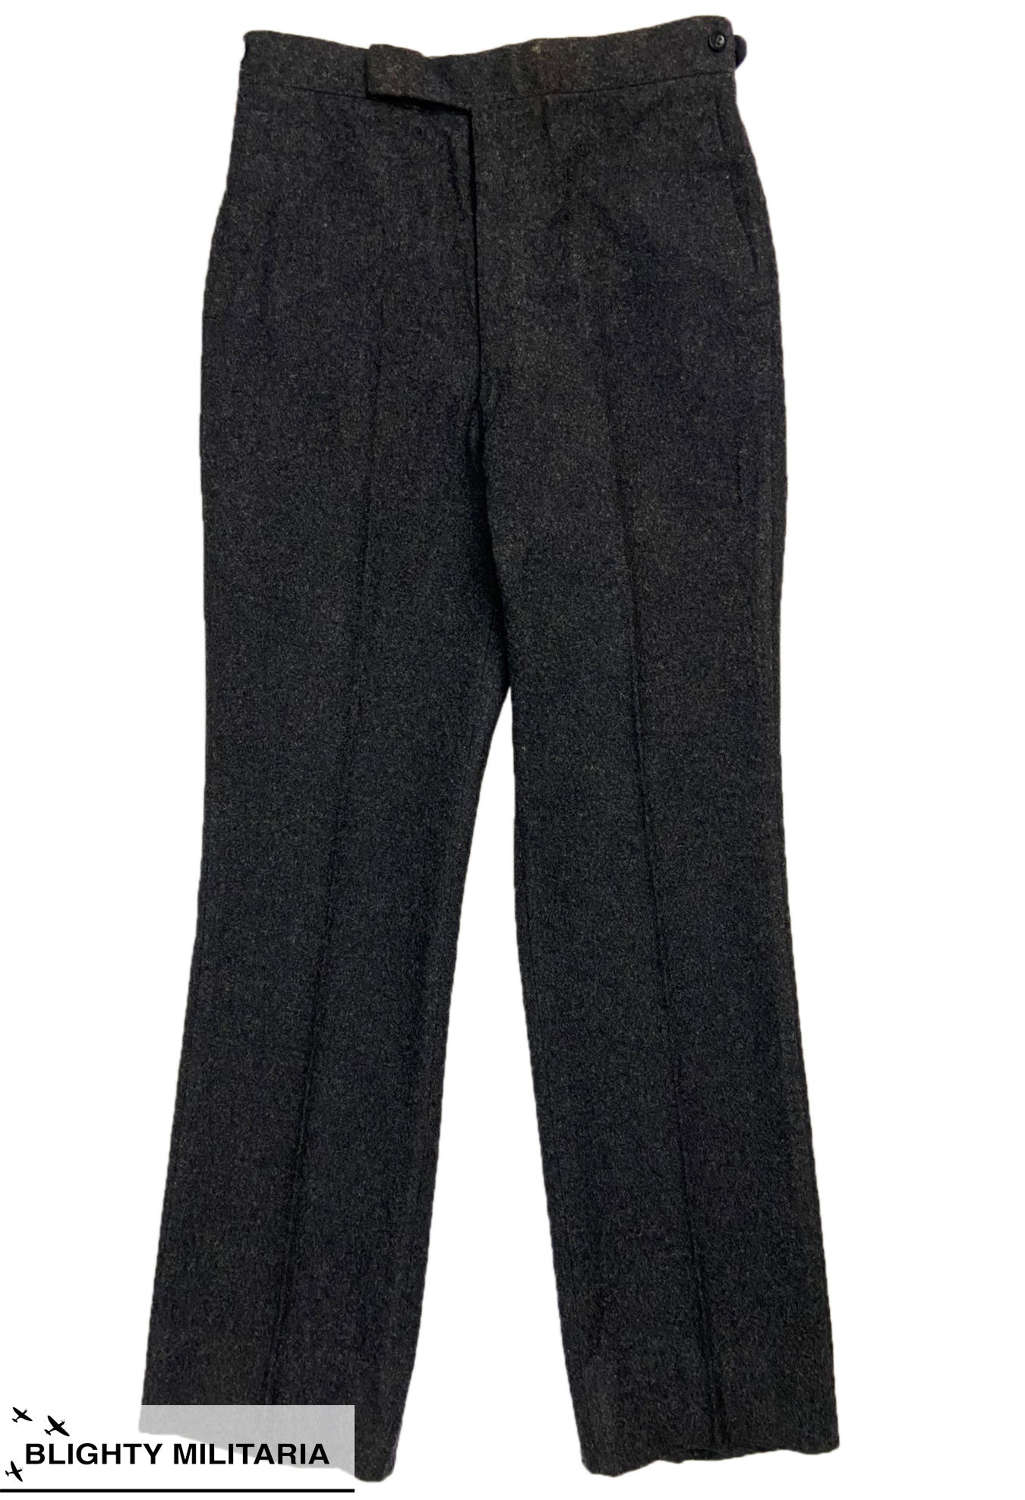 Original Early 1960s French Grey Flannel Trousers - 29 x 30.5